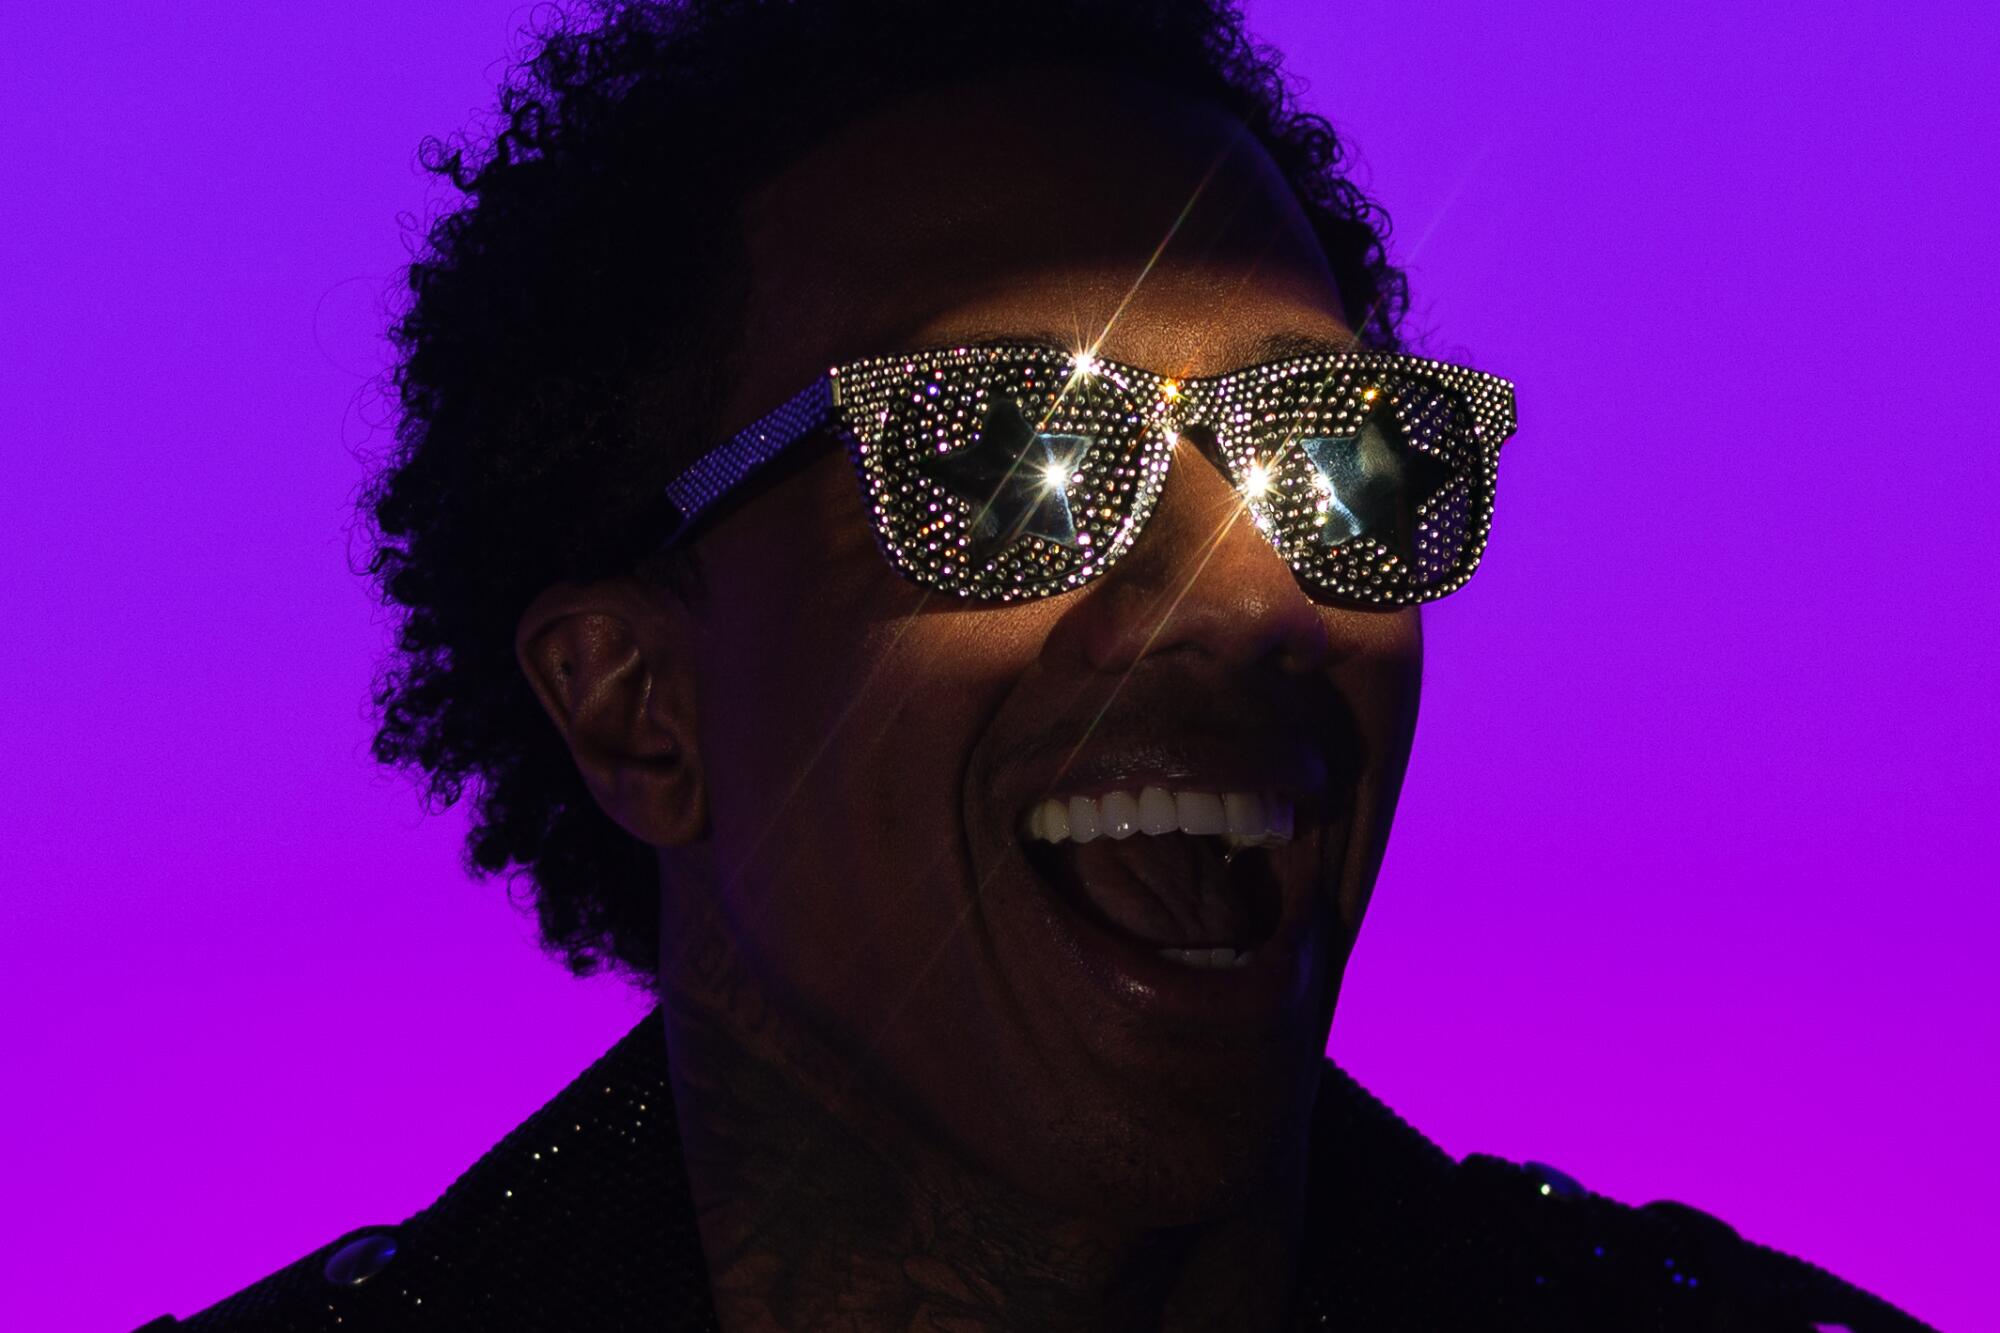 Backed by a glowing purple backdrop, Nick Cannon poses for a portrait in sparkly shades.